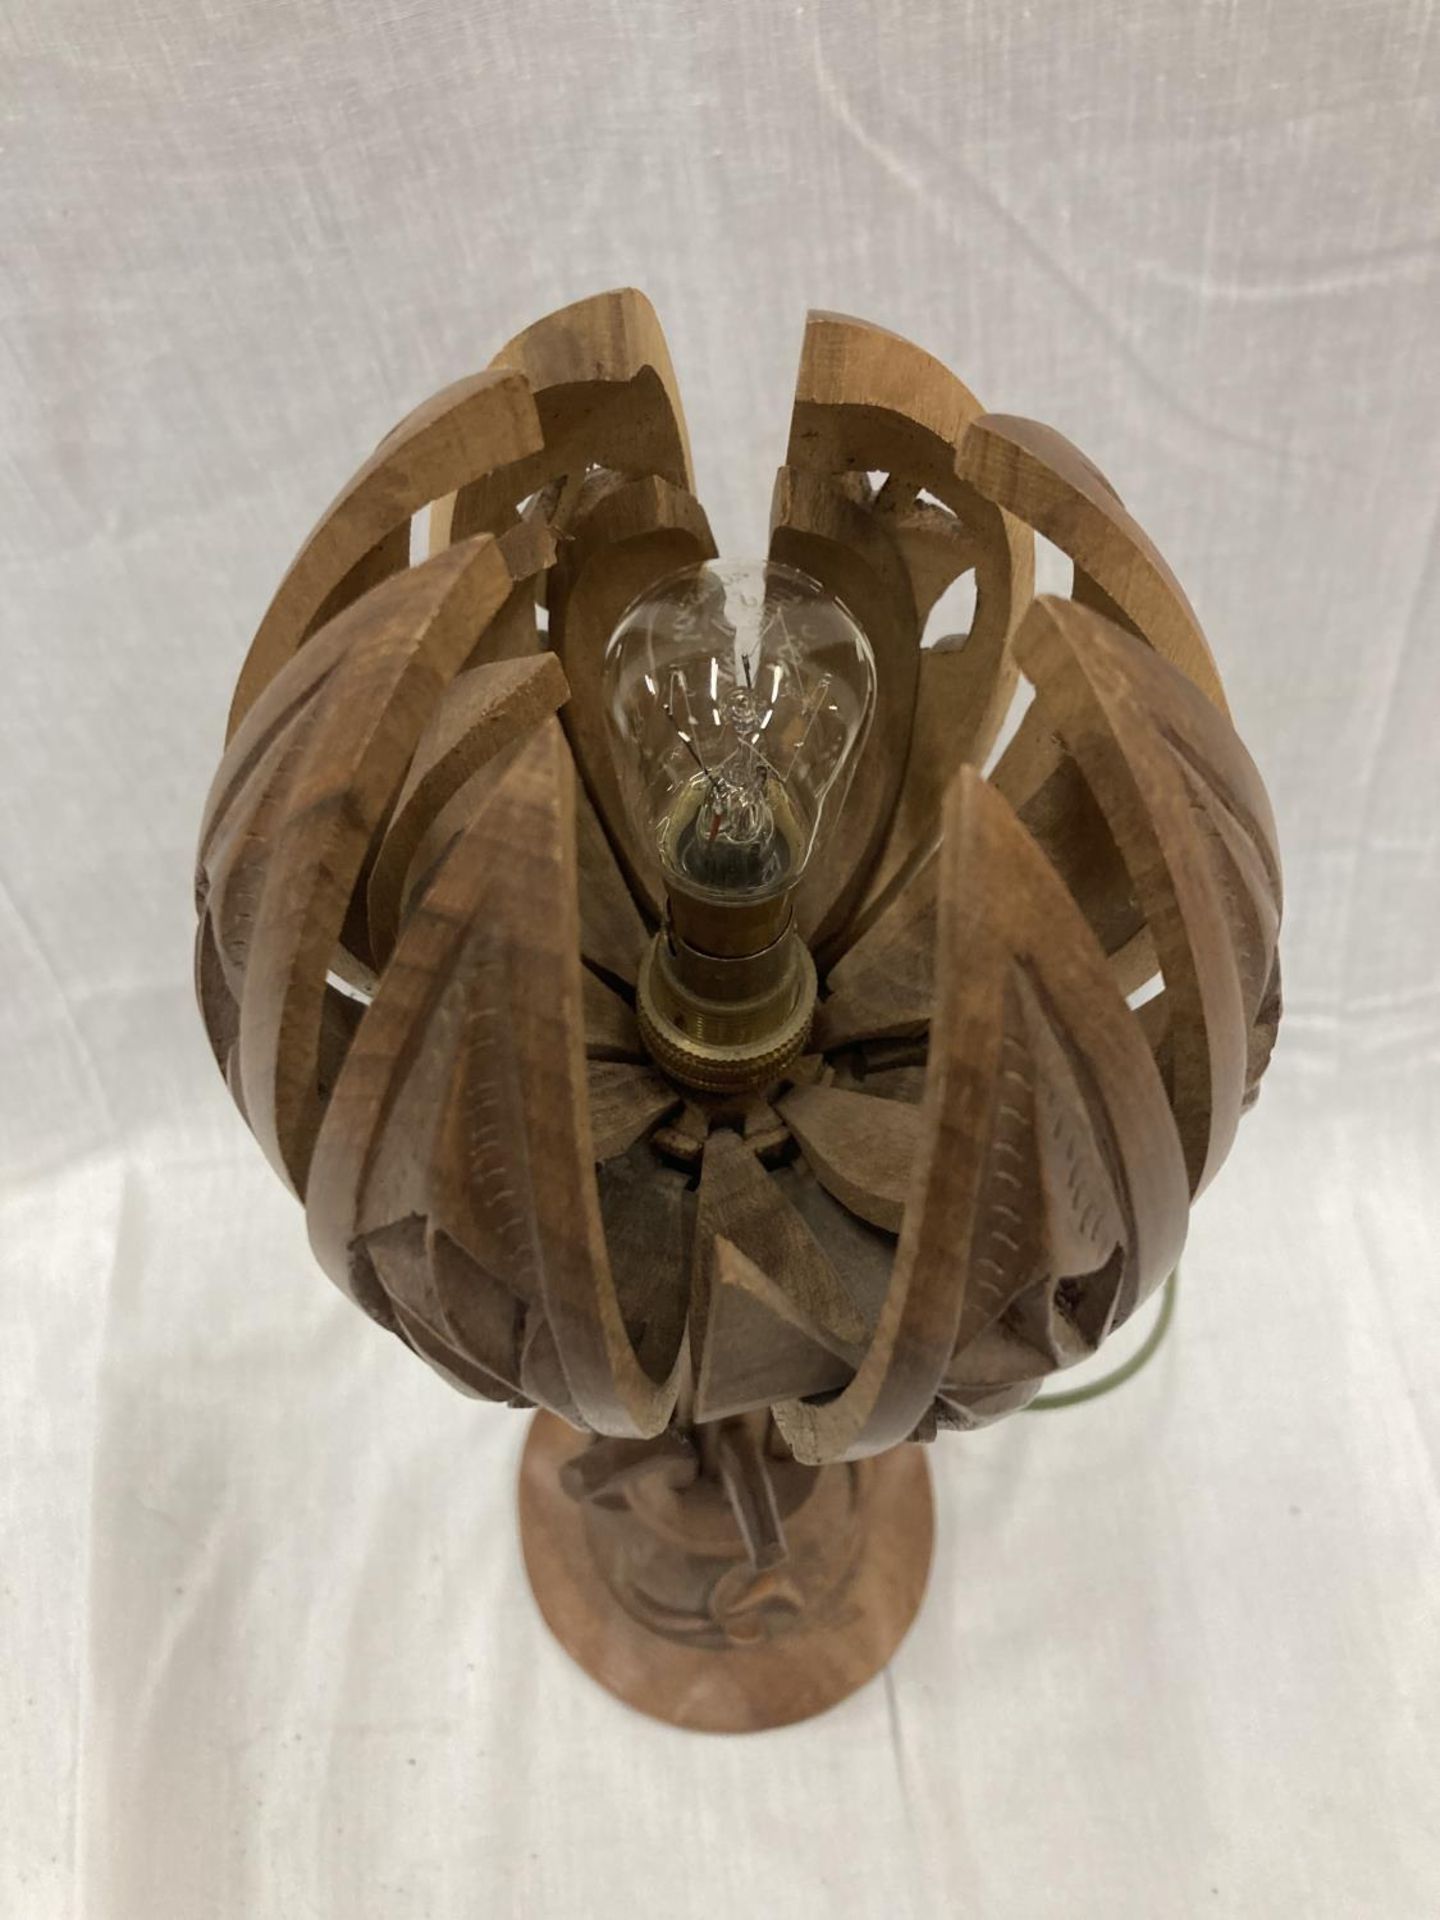 AN ARTS & CRAFTS STYLE WALNUT LOTUS FLOWER LAMP WHICH TURNS TO REVEAL THE FLOWER, IN WORKING ORDER - Image 2 of 5